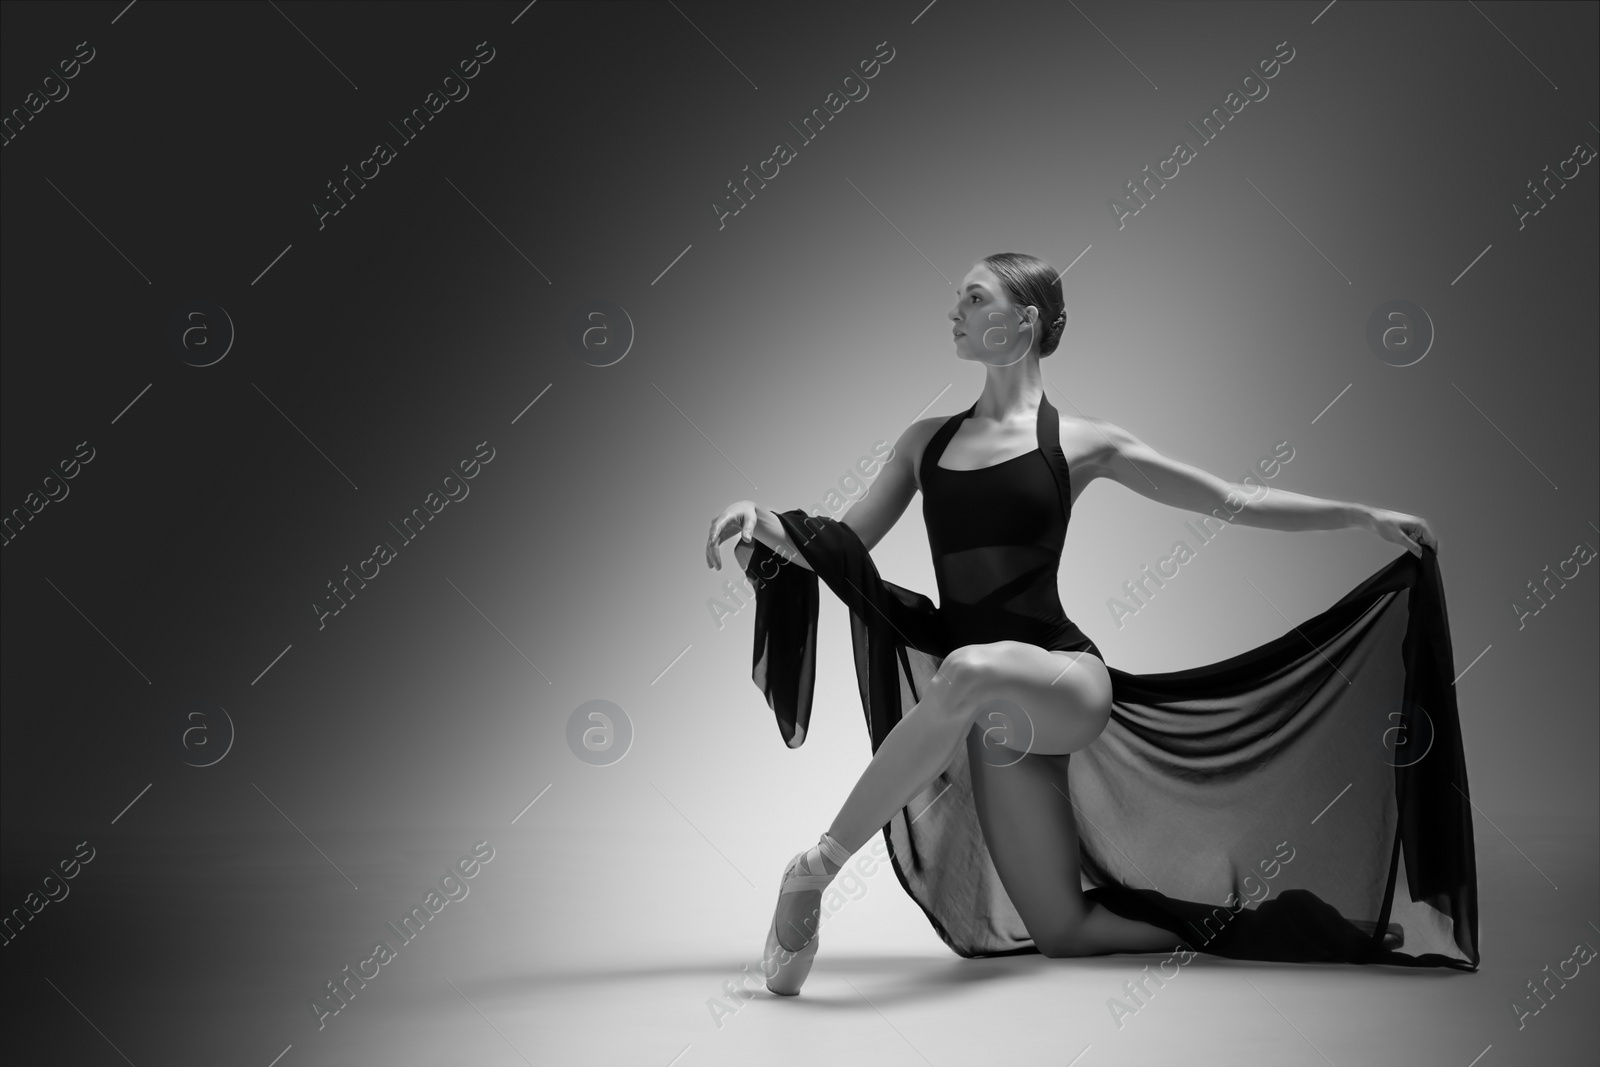 Image of Graceful young ballerina practicing dance moves with veil, space for text. Black and white effect